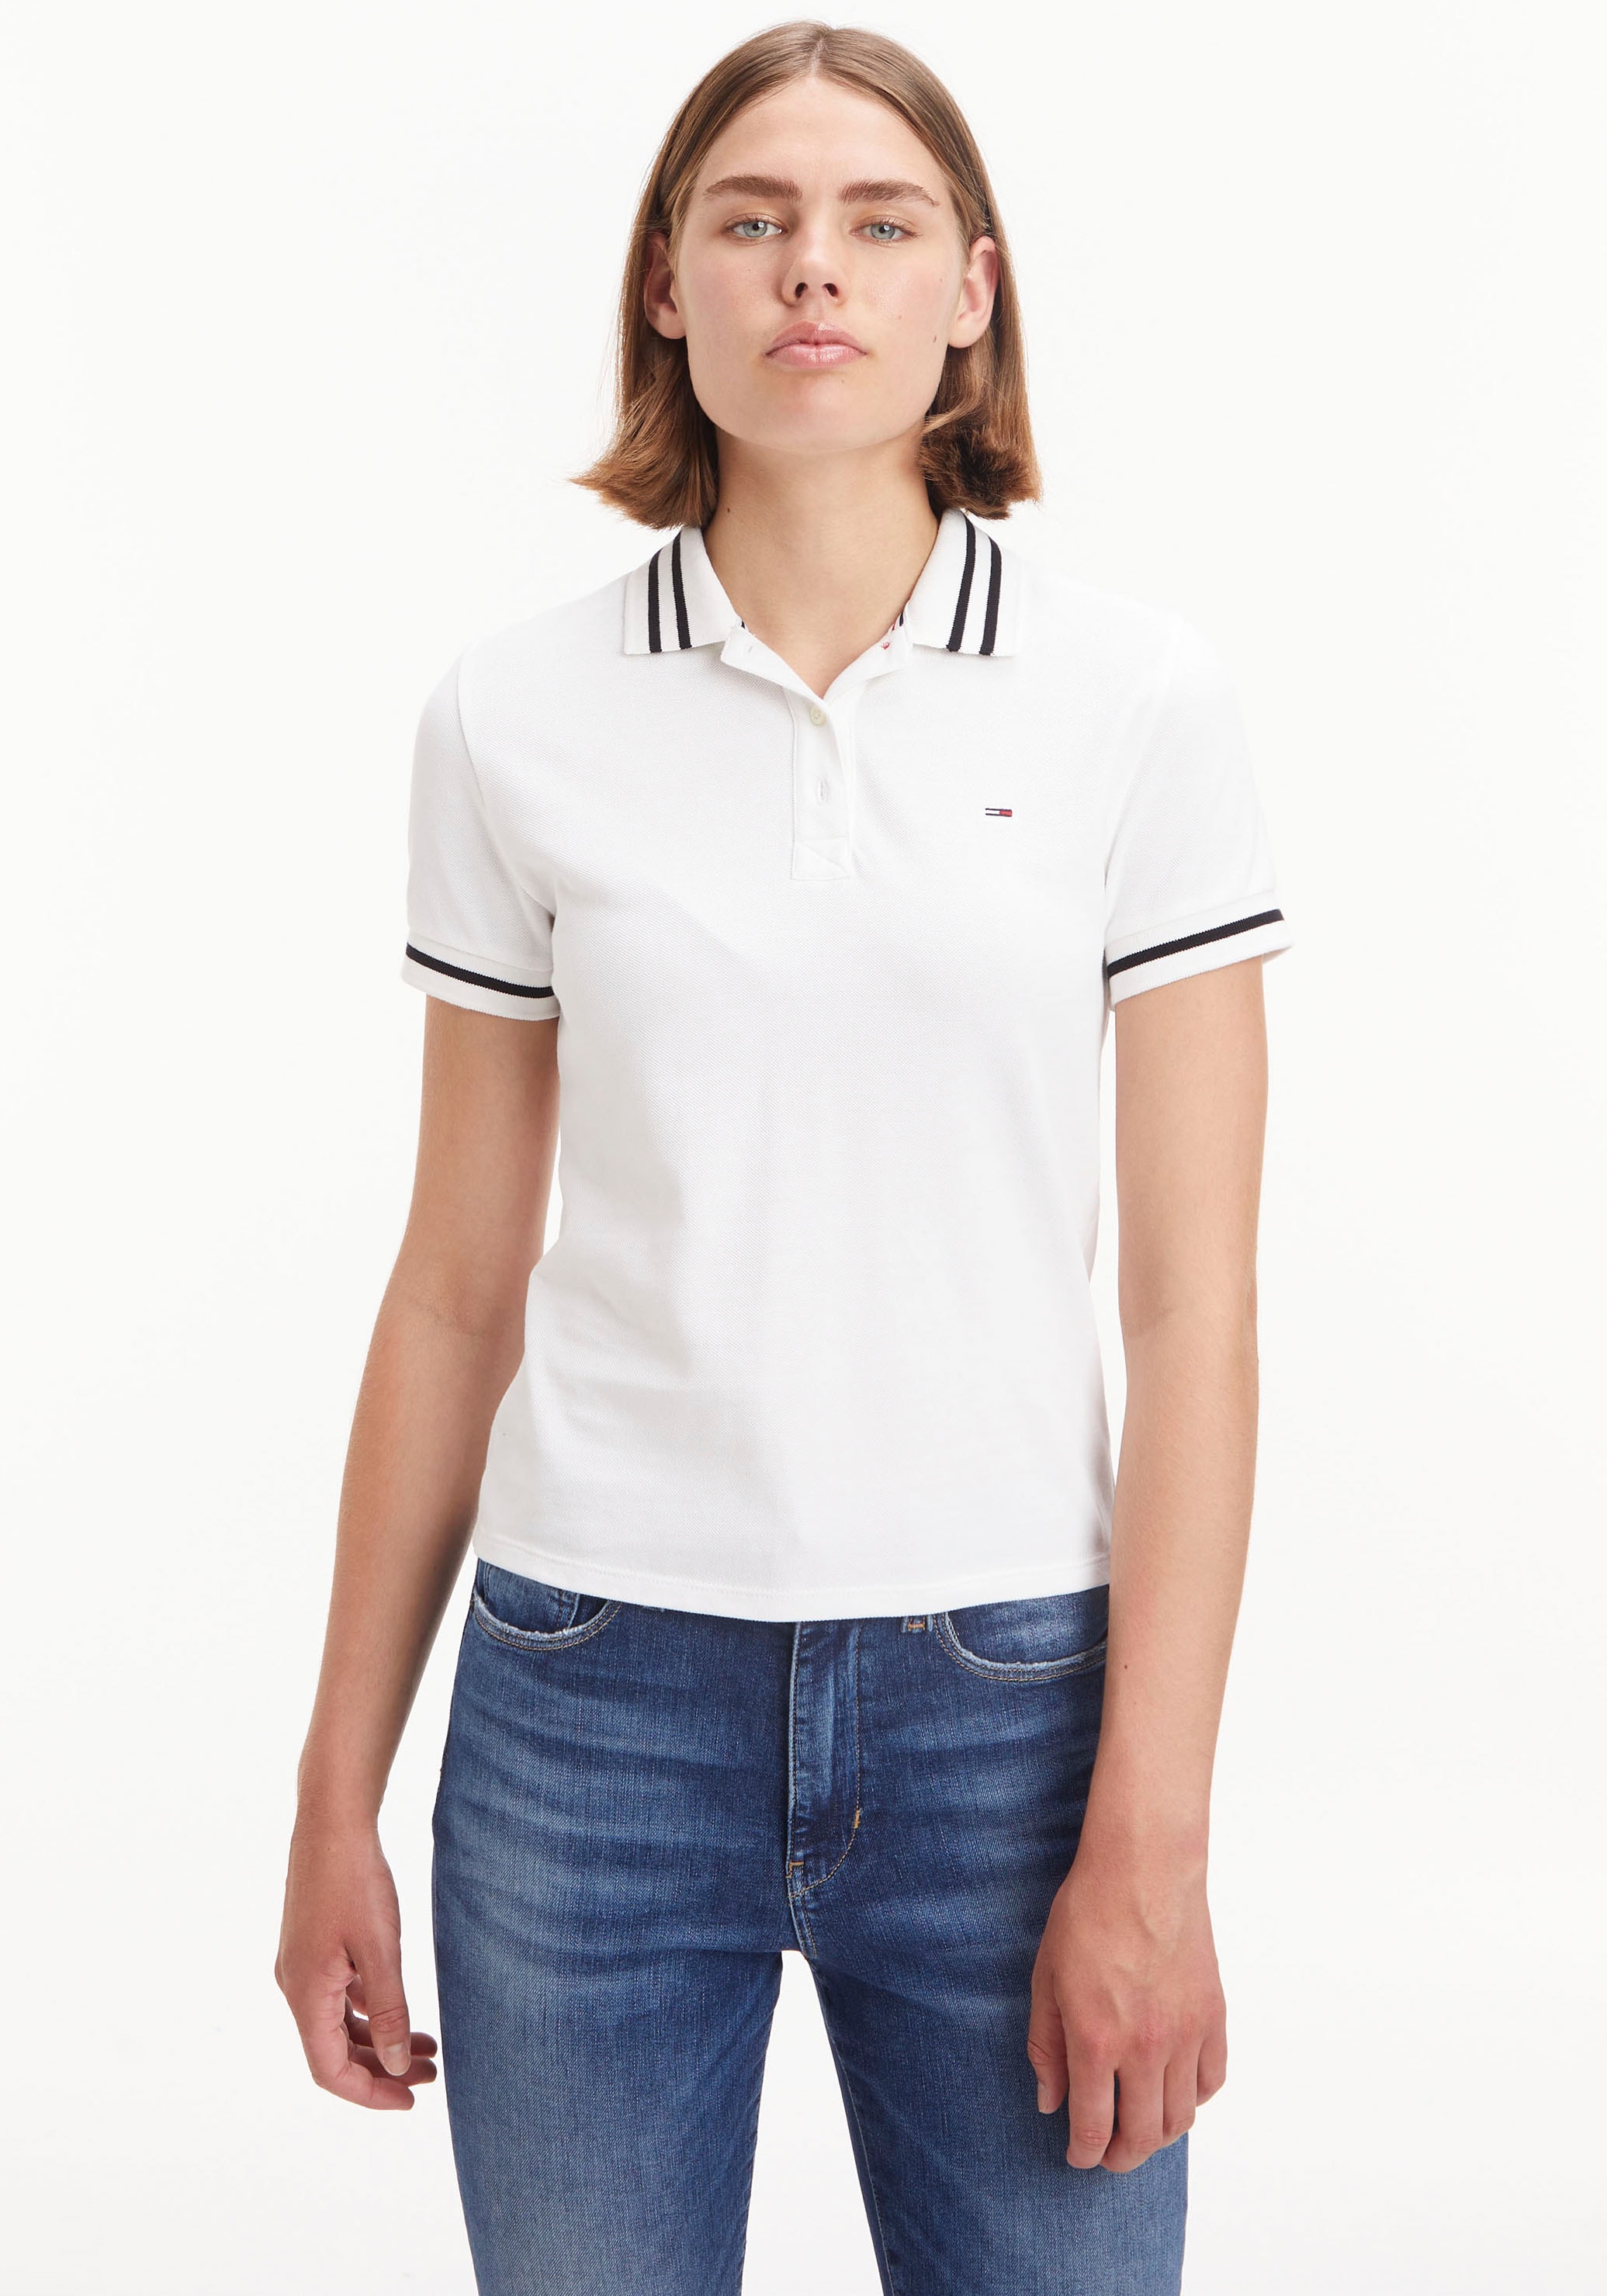 walking | & ESSENTIAL Tommy mit Tommy »TJW shoppen Label-Flag Kontraststreifen POLO«, Jeans I\'m Poloshirt TIPPING Jeans